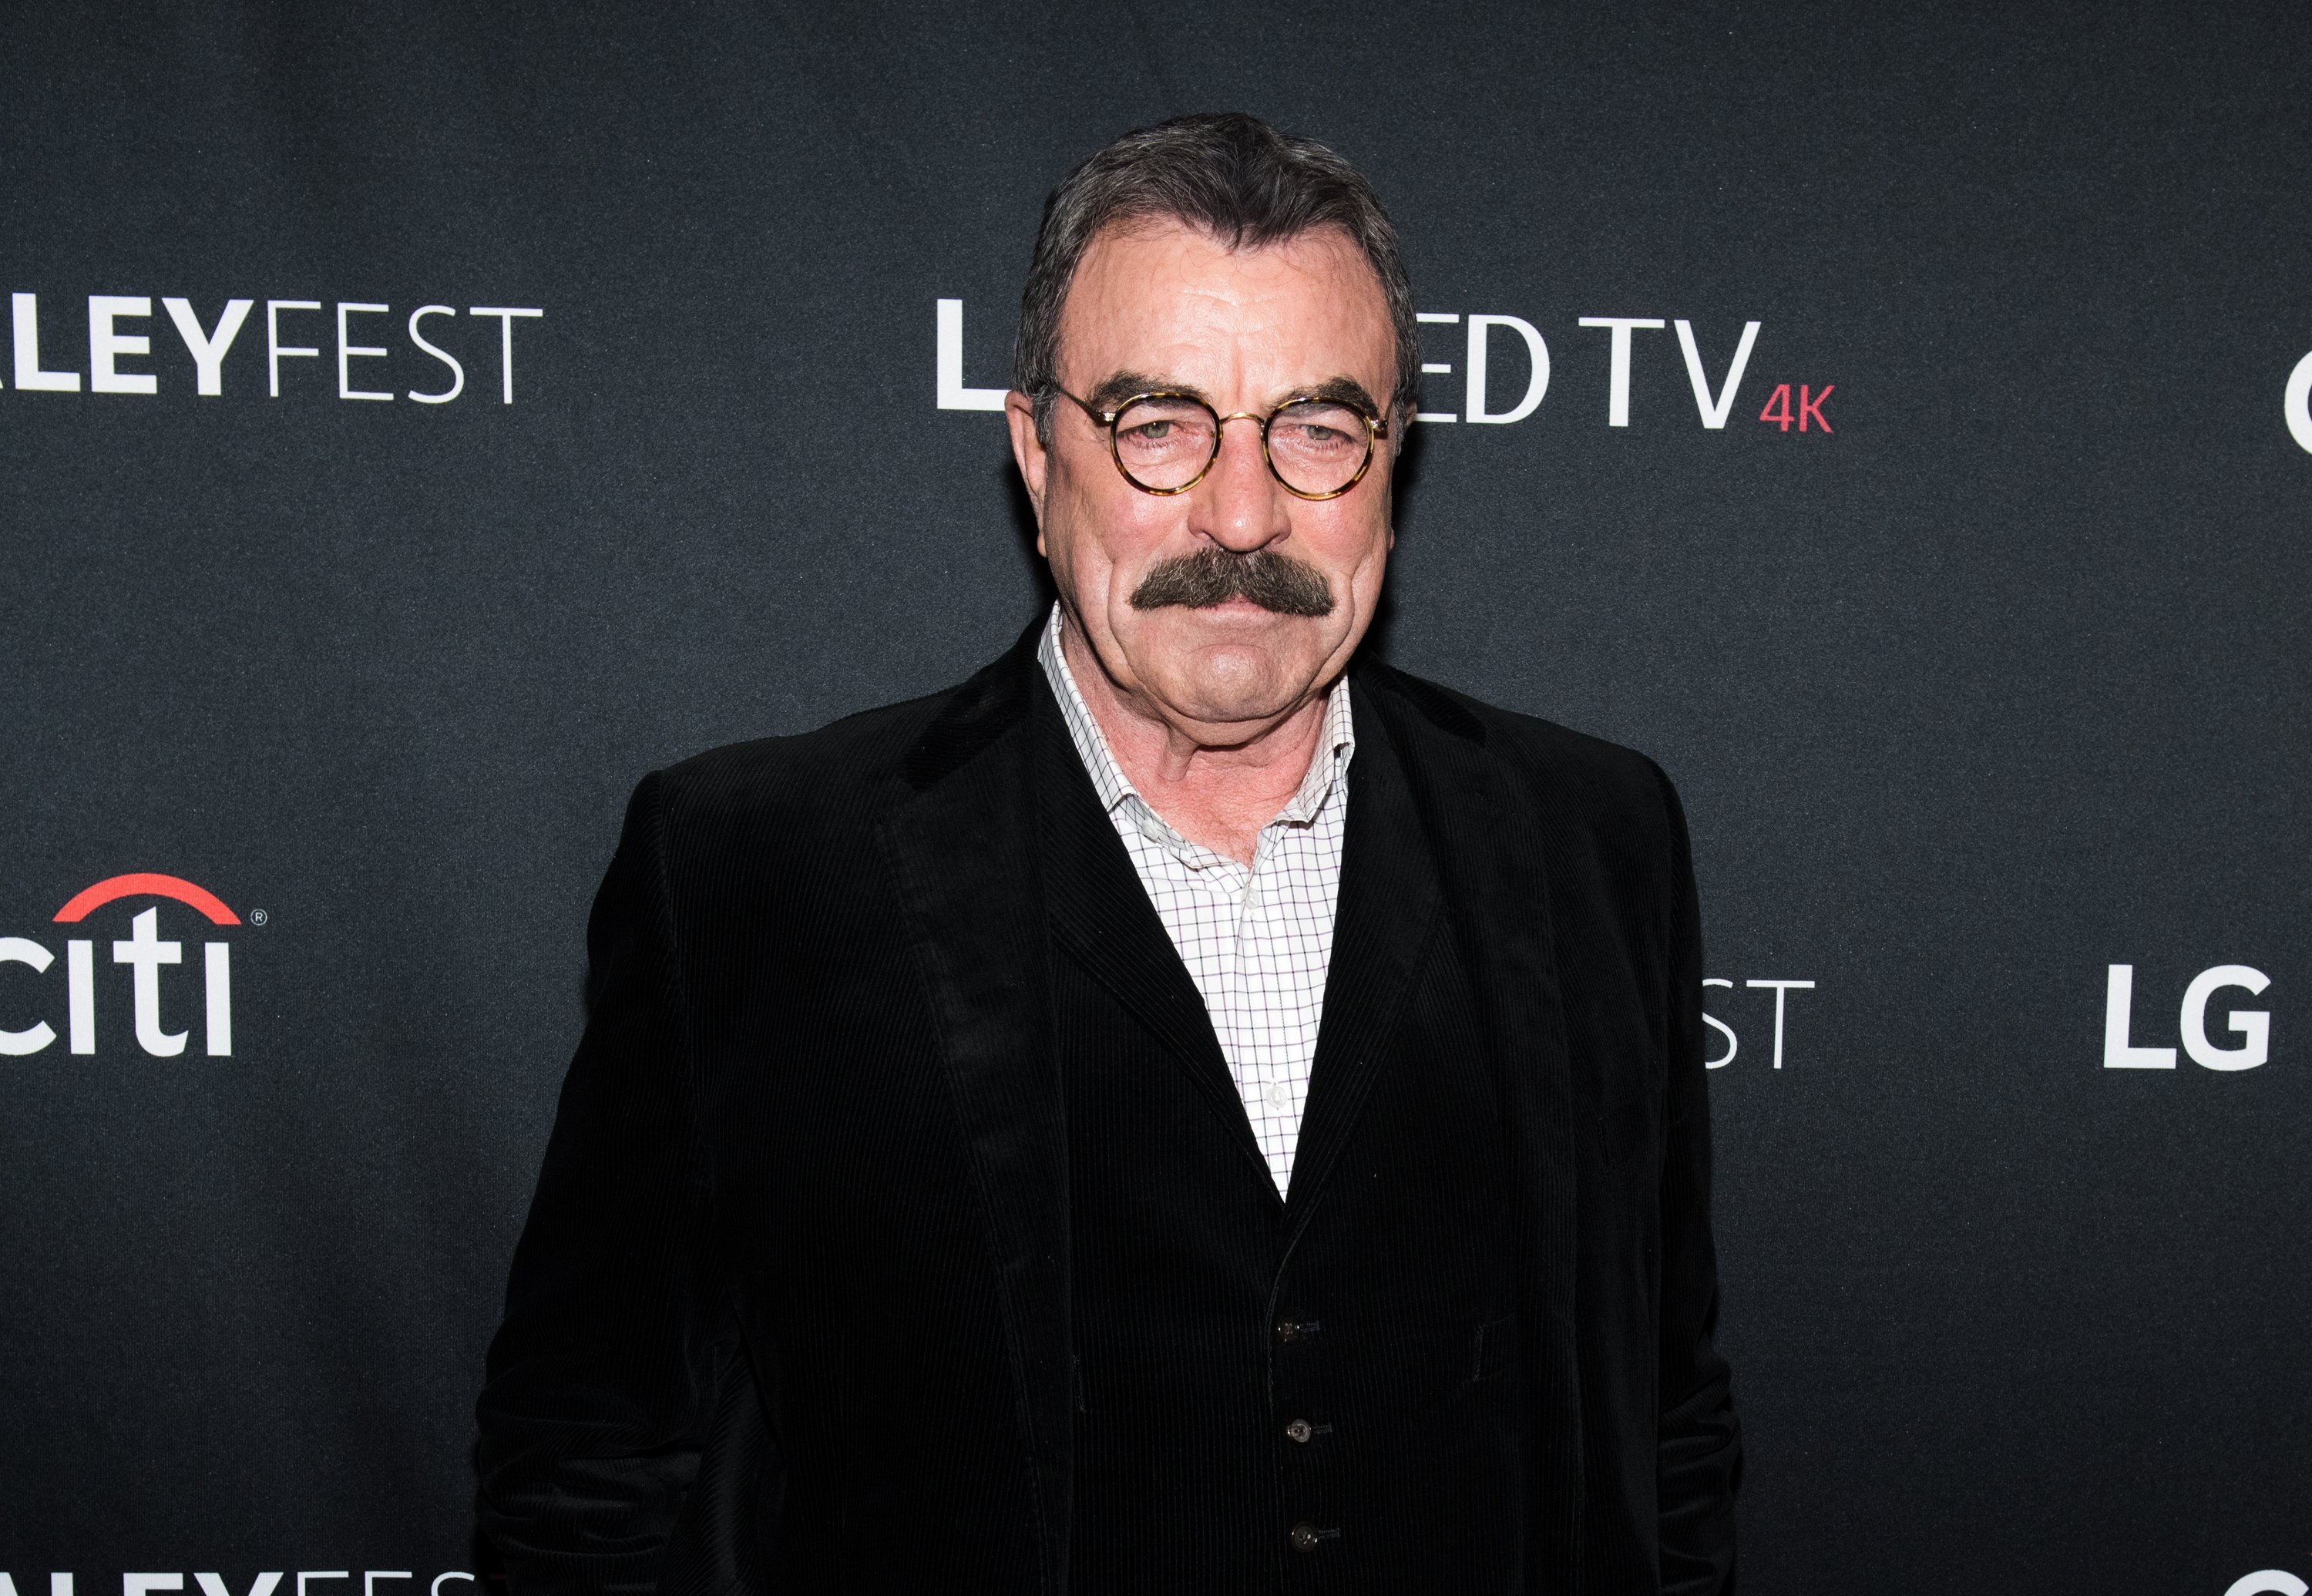 Tom Selleck attends the "Blue Bloods" screening during PaleyFest NY 2017 at The Paley Center for Media on October 16, 2017 | Photo: GettyImages